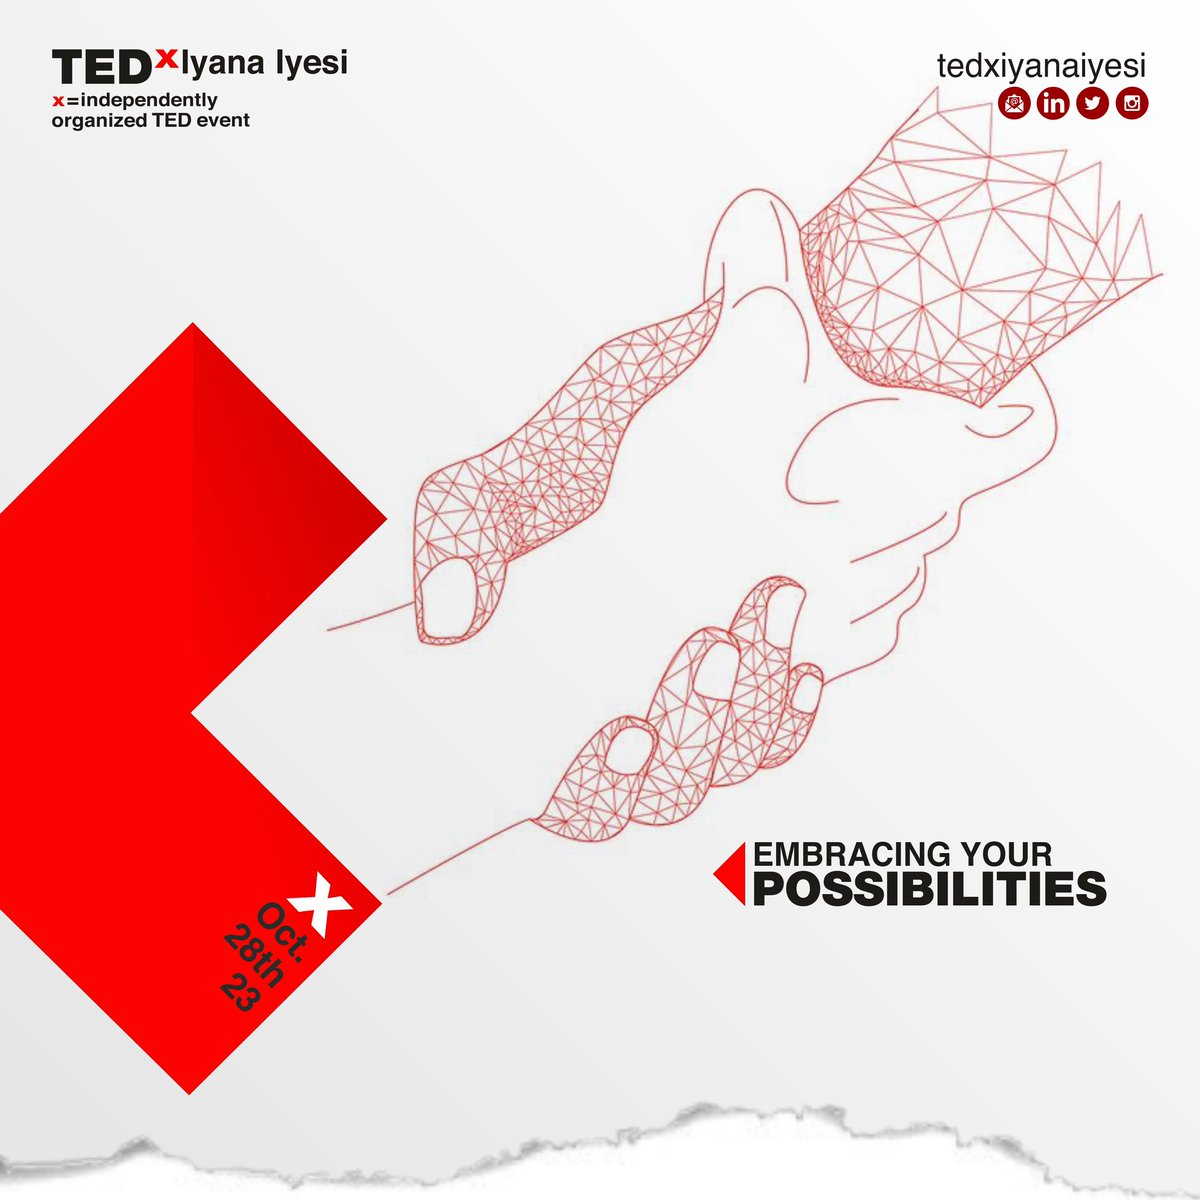 And it’s finally here! 

The TEDx Event you’ve been waiting for is only 11 days away!
Have you gotten your tickets? 
Ticket sales ends this weekend 

#tedxiyanaiyesi #tedx #tedxevents #EmbracingYourPossibilities #tedxspeaker #28oct #linkinbio